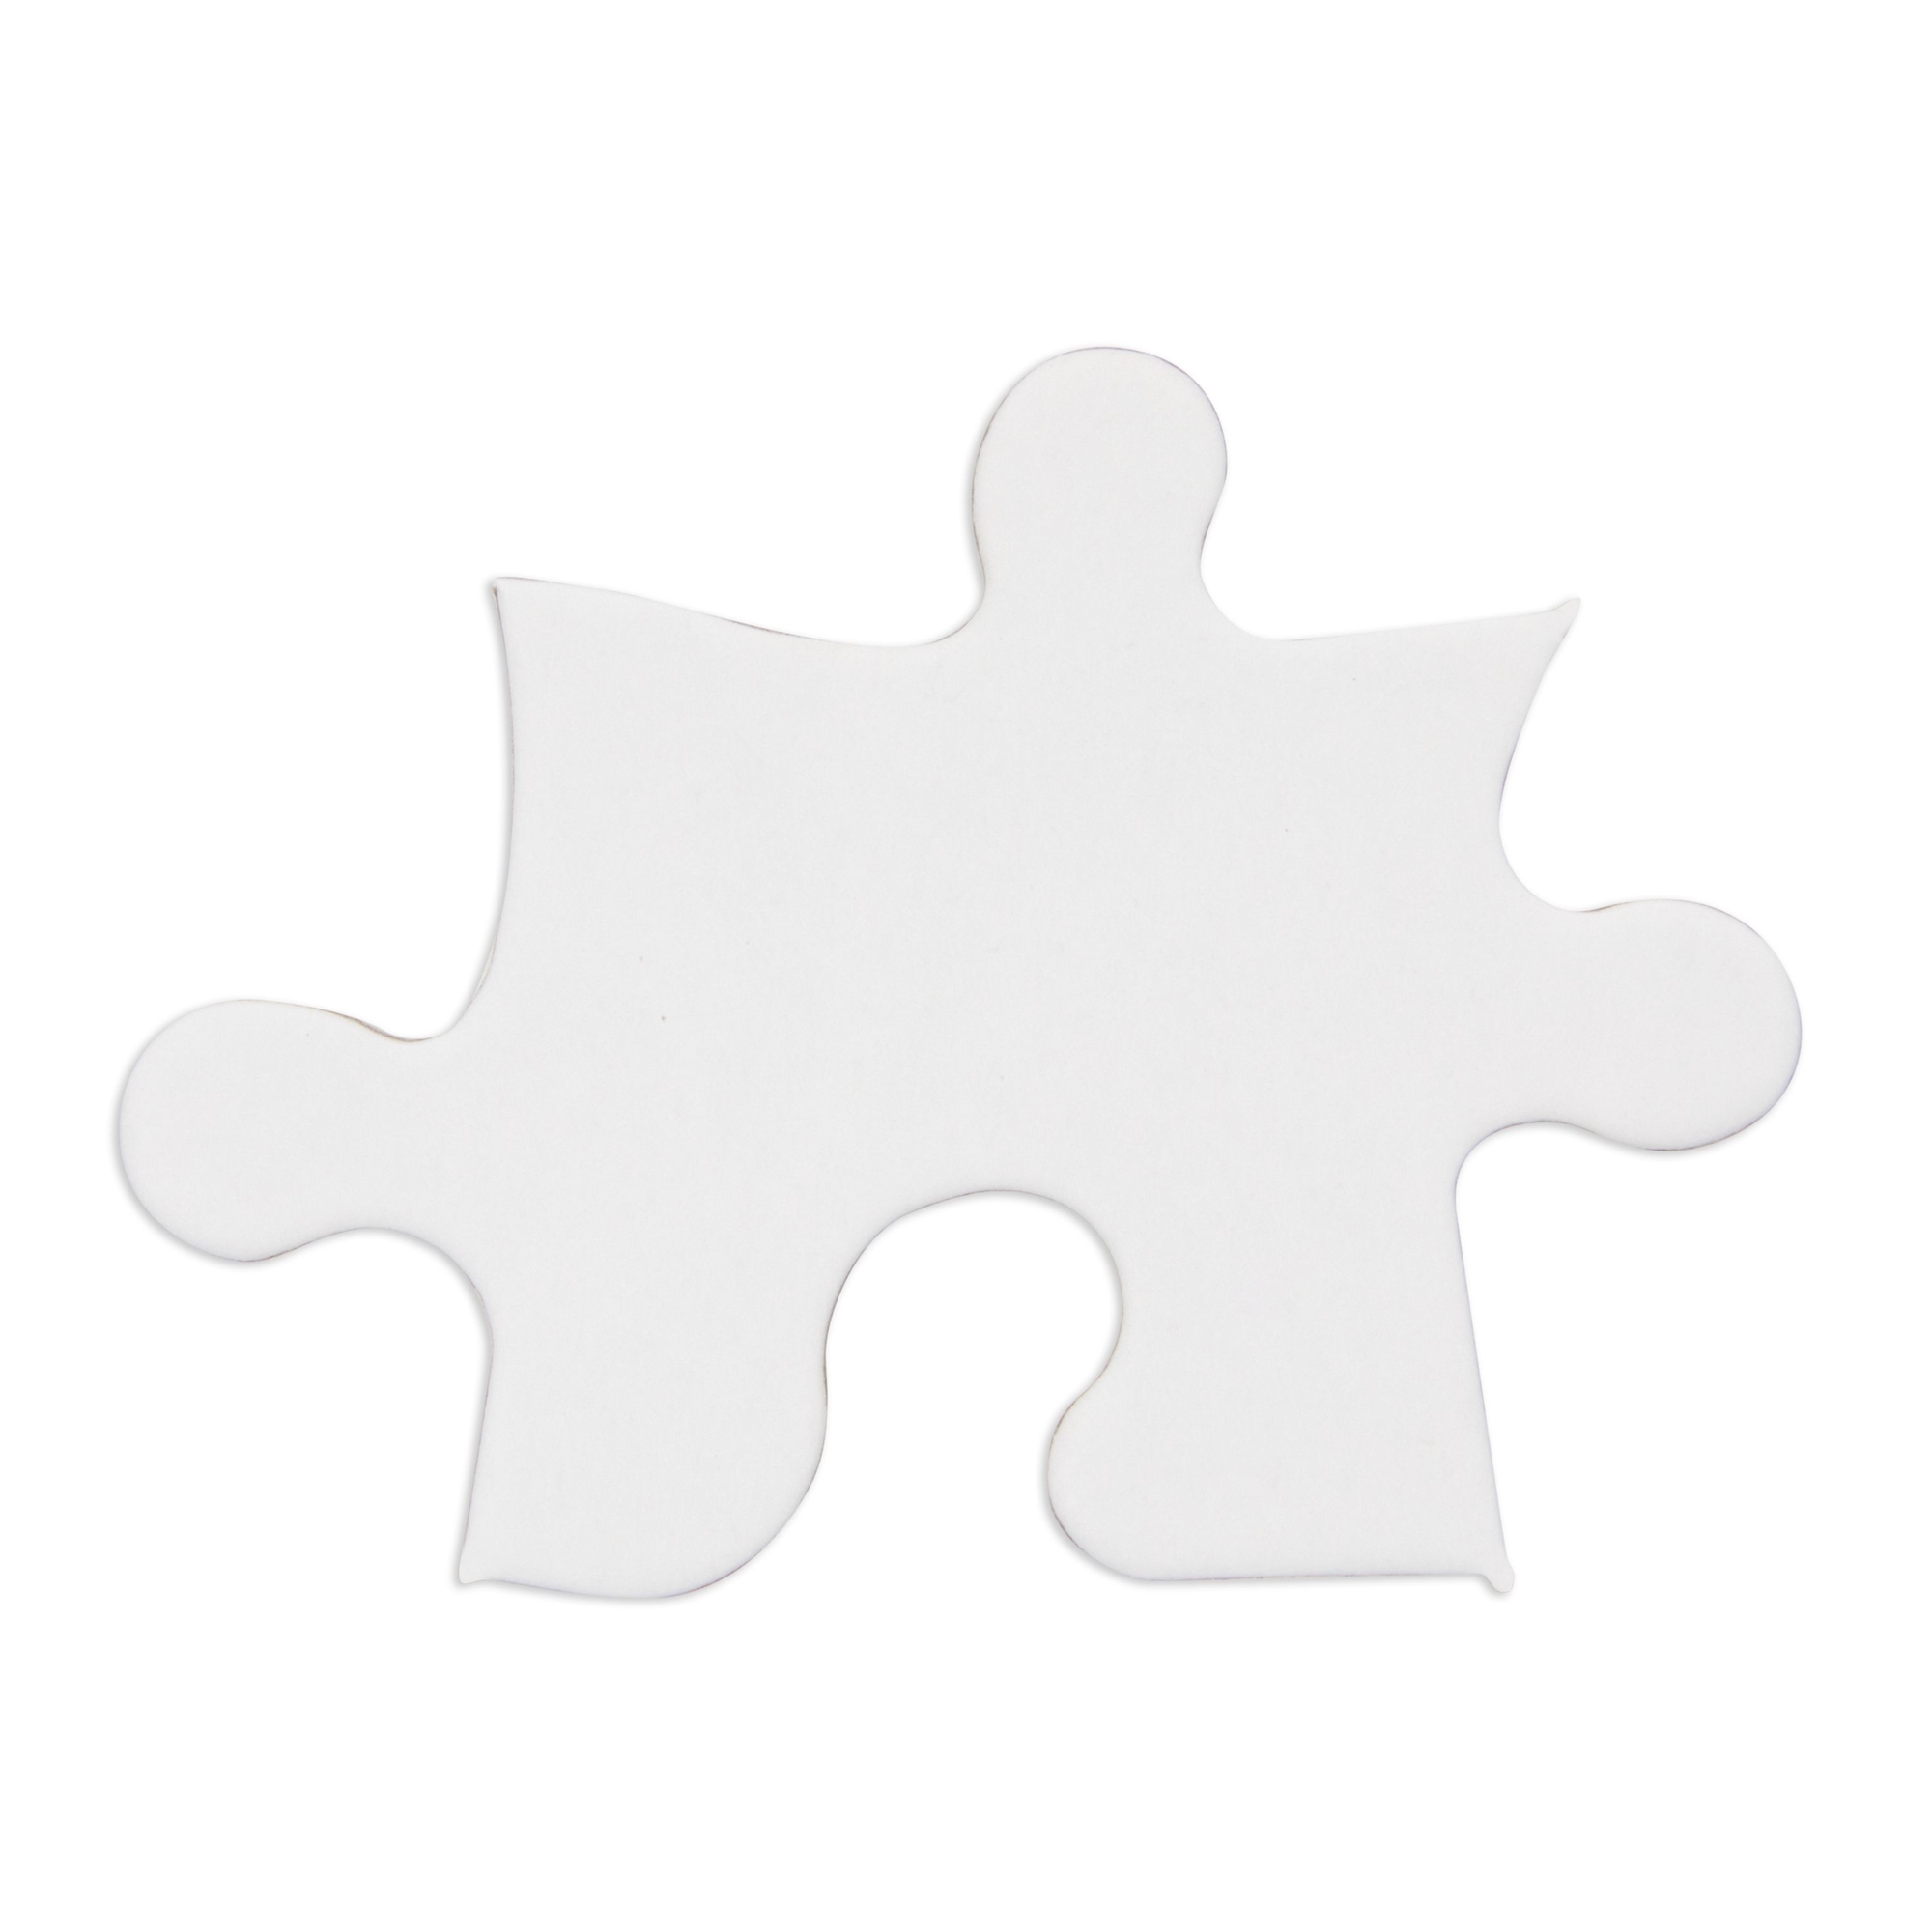 36 Blank Puzzles to Draw On, 8.5 x 11 Inch, White Jigsaw Puzzle Pieces to  Create DIY, Arts and Crafts Projects (48 Pieces Each) 